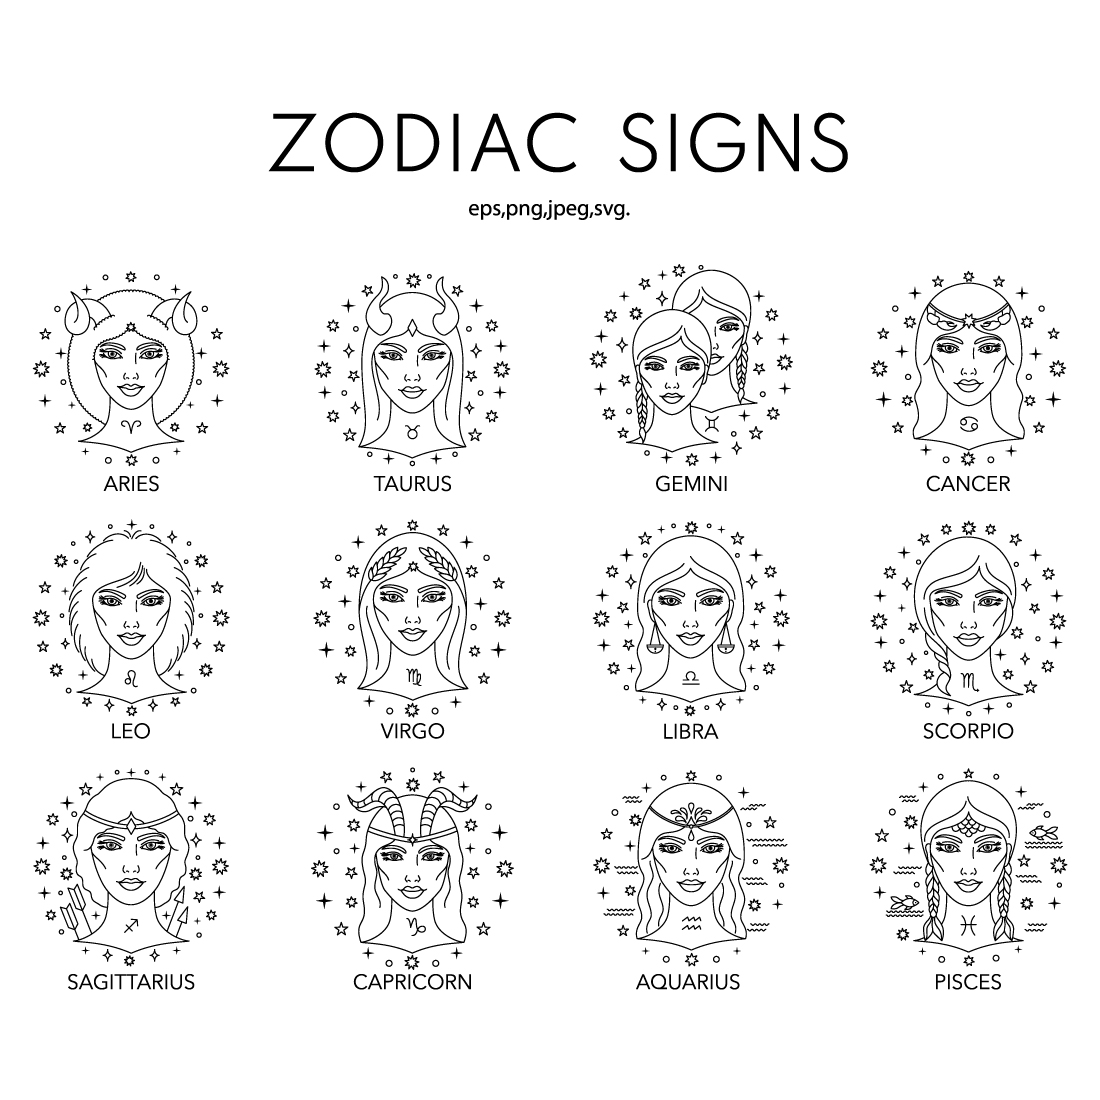 Zodiac signs preview image.